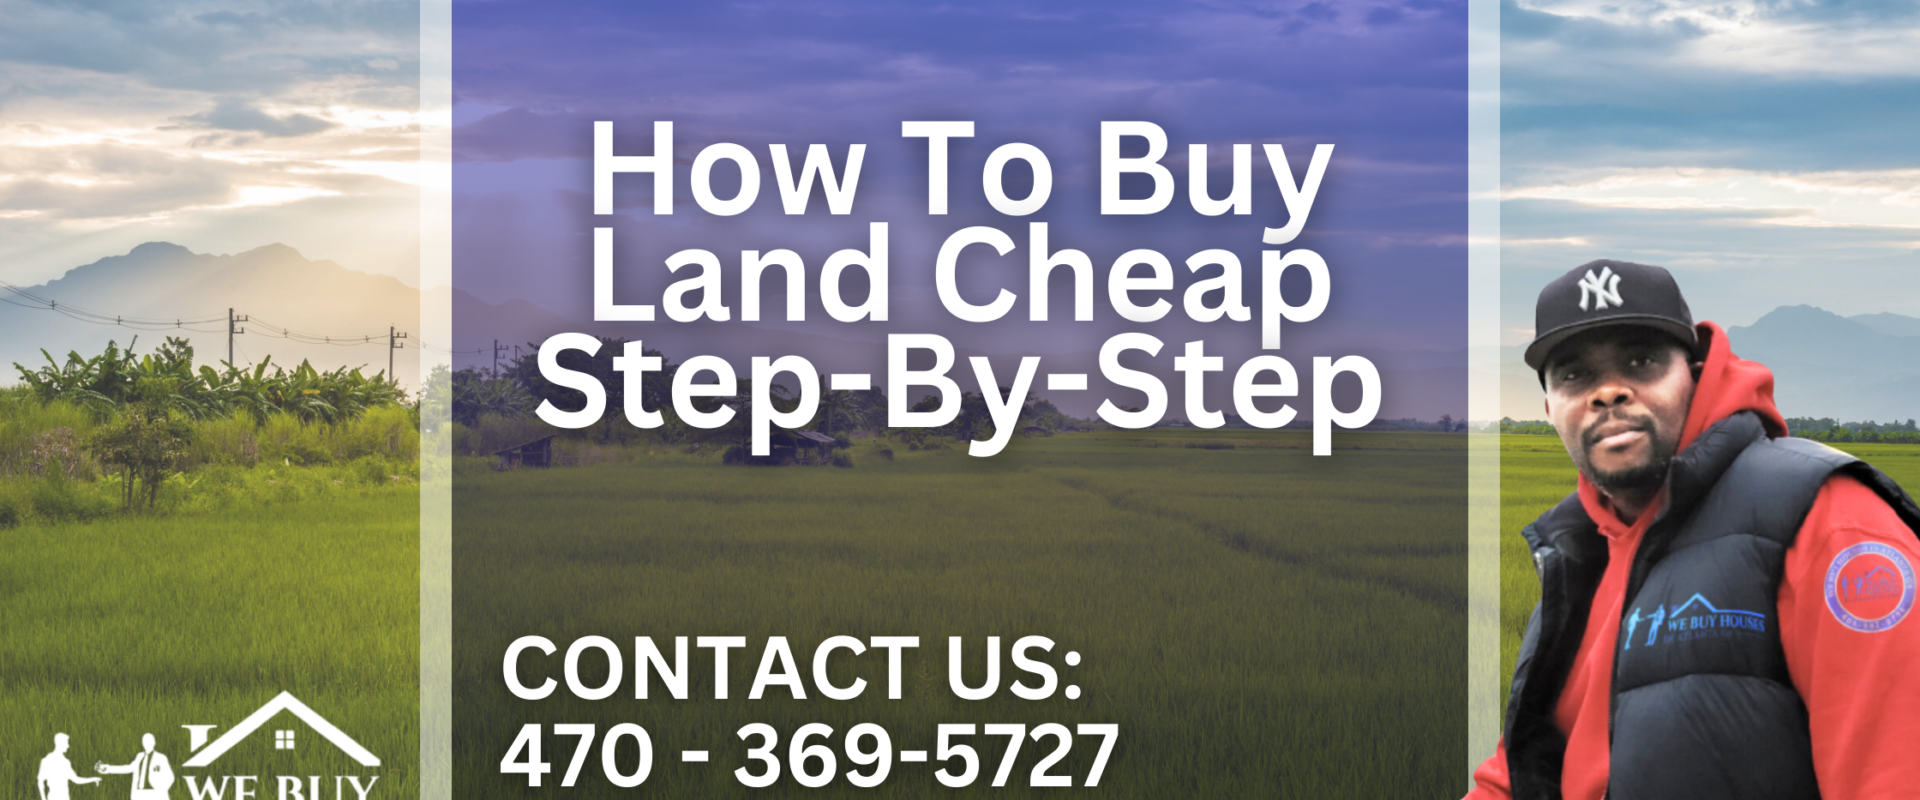 How To Buy Land Cheap Step-By-Step